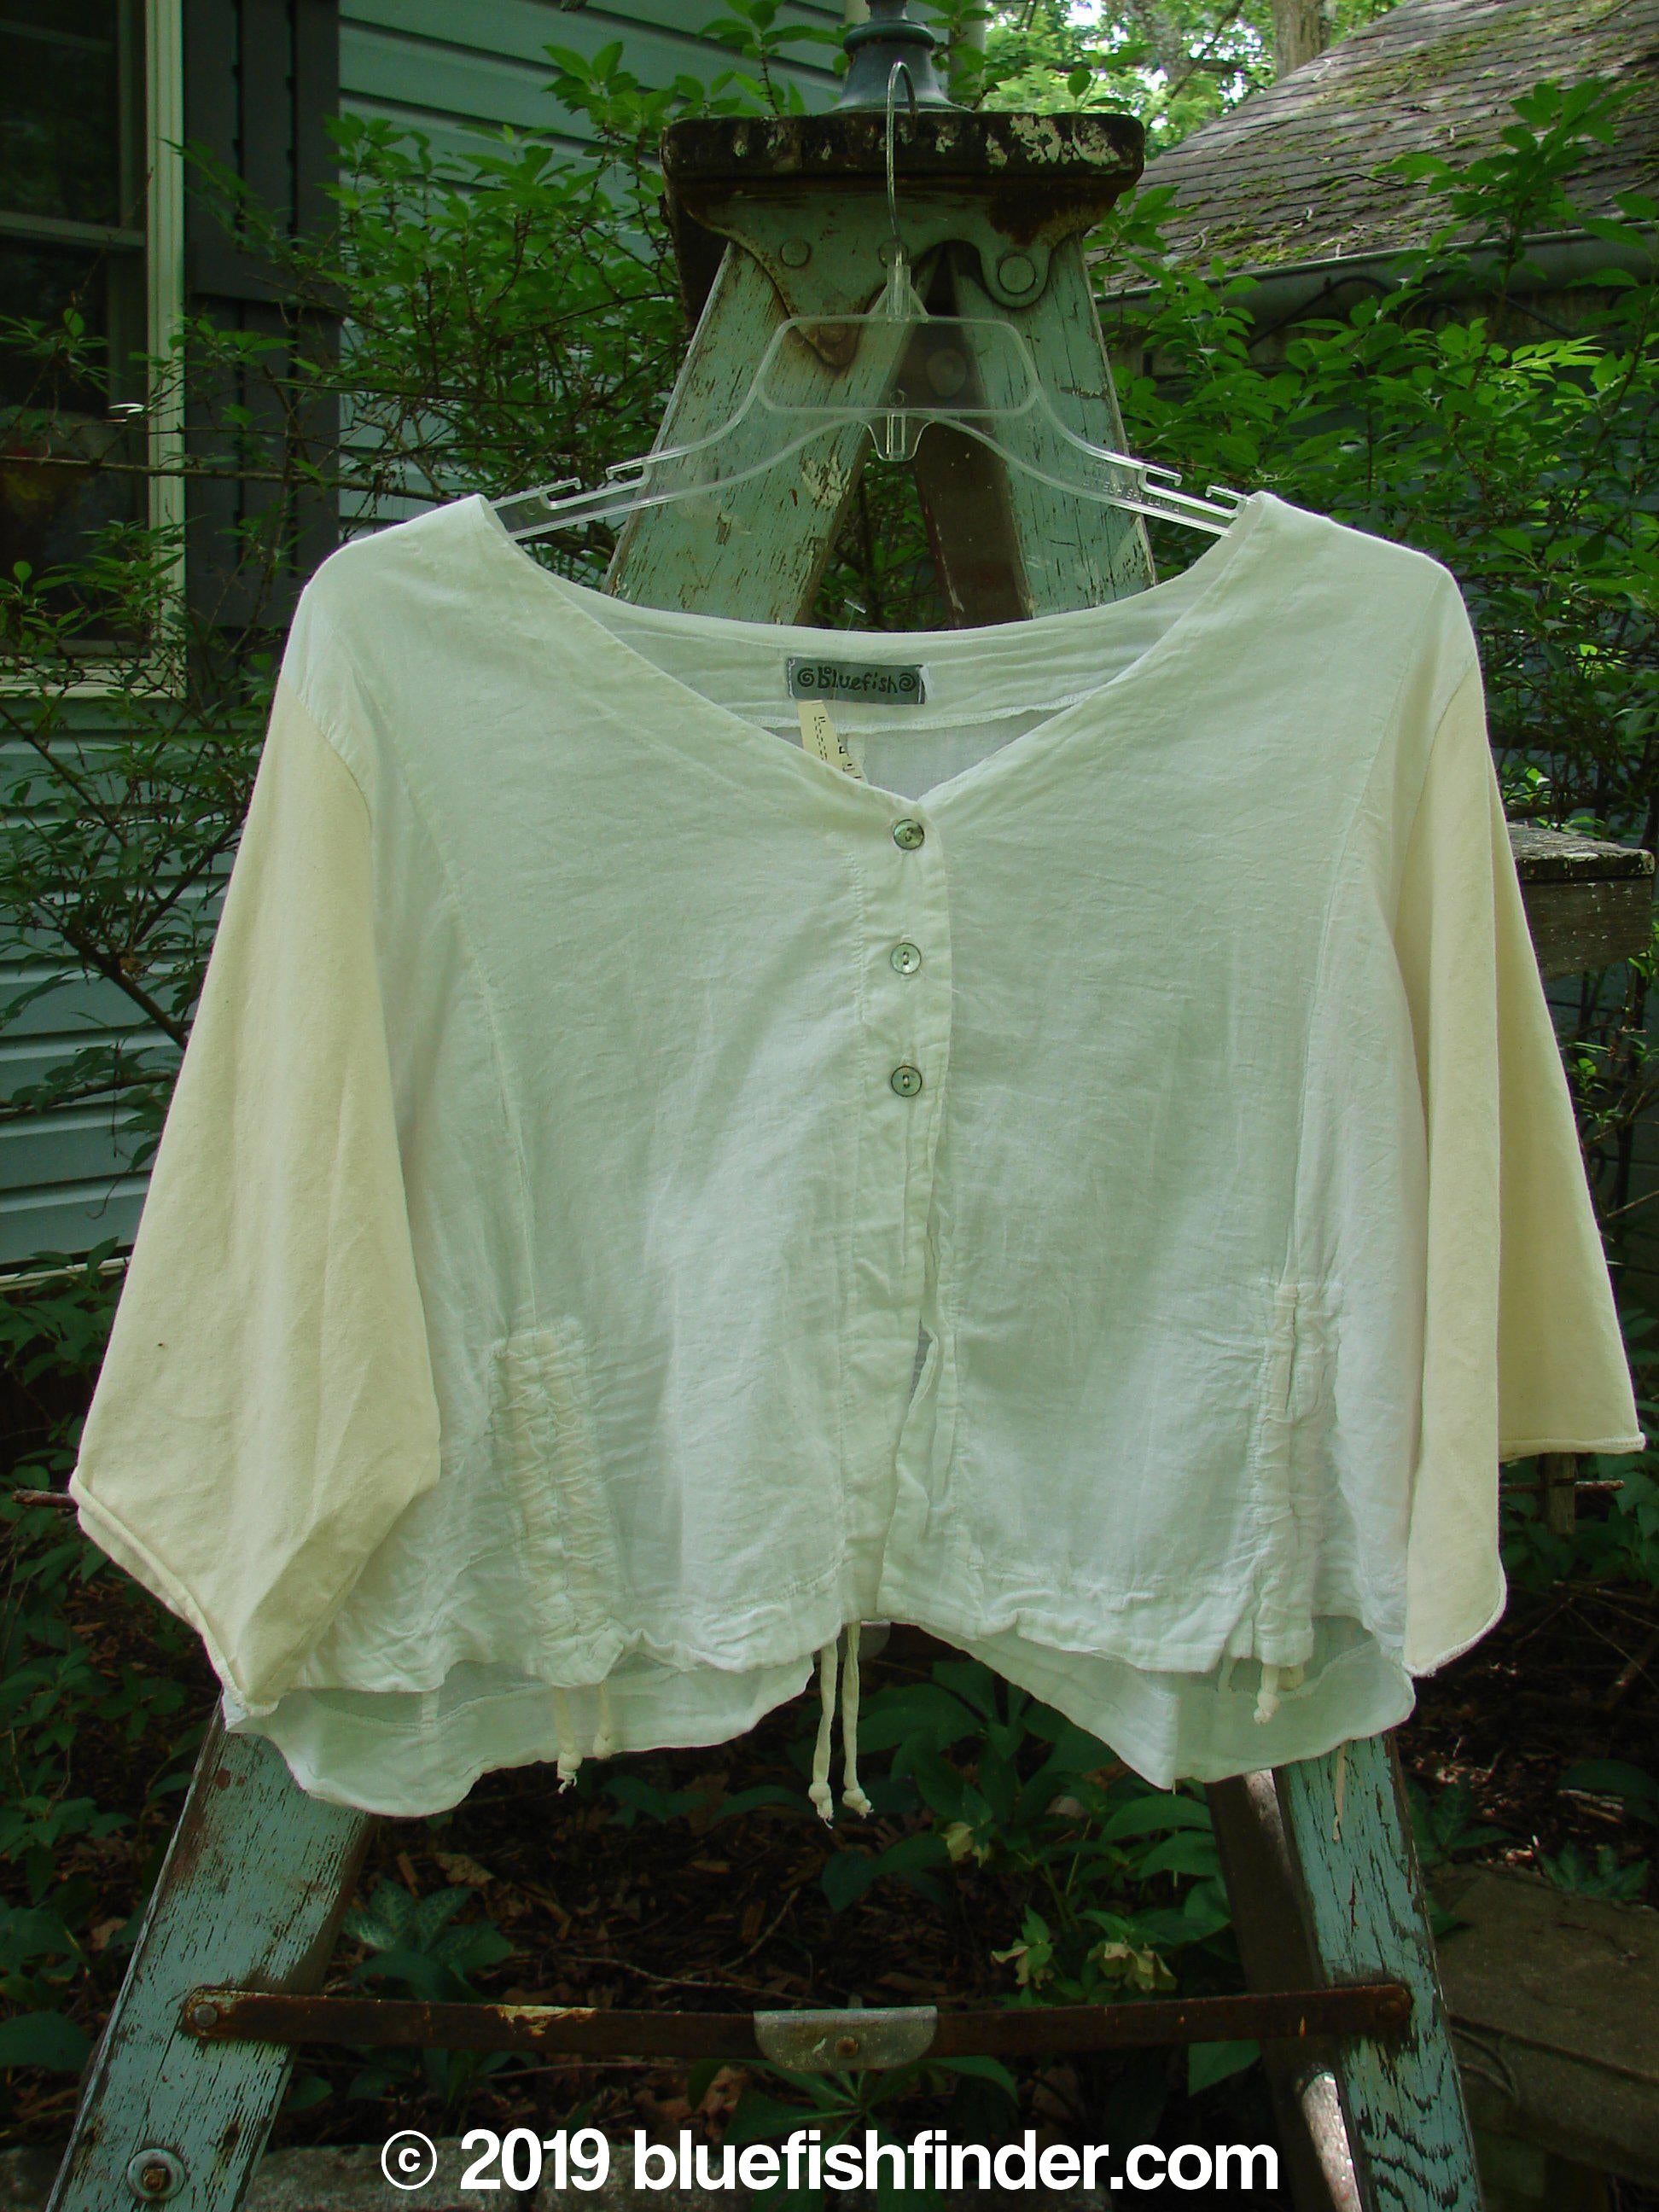 A white shirt on a swinger, part of the Barclay NWT Batiste Draw Midi Meadow Trio in White. Features include a wider boxier crop shape, three-quarter length cotton sleeves, and a wider neckline. The image showcases the shirt's design and style.